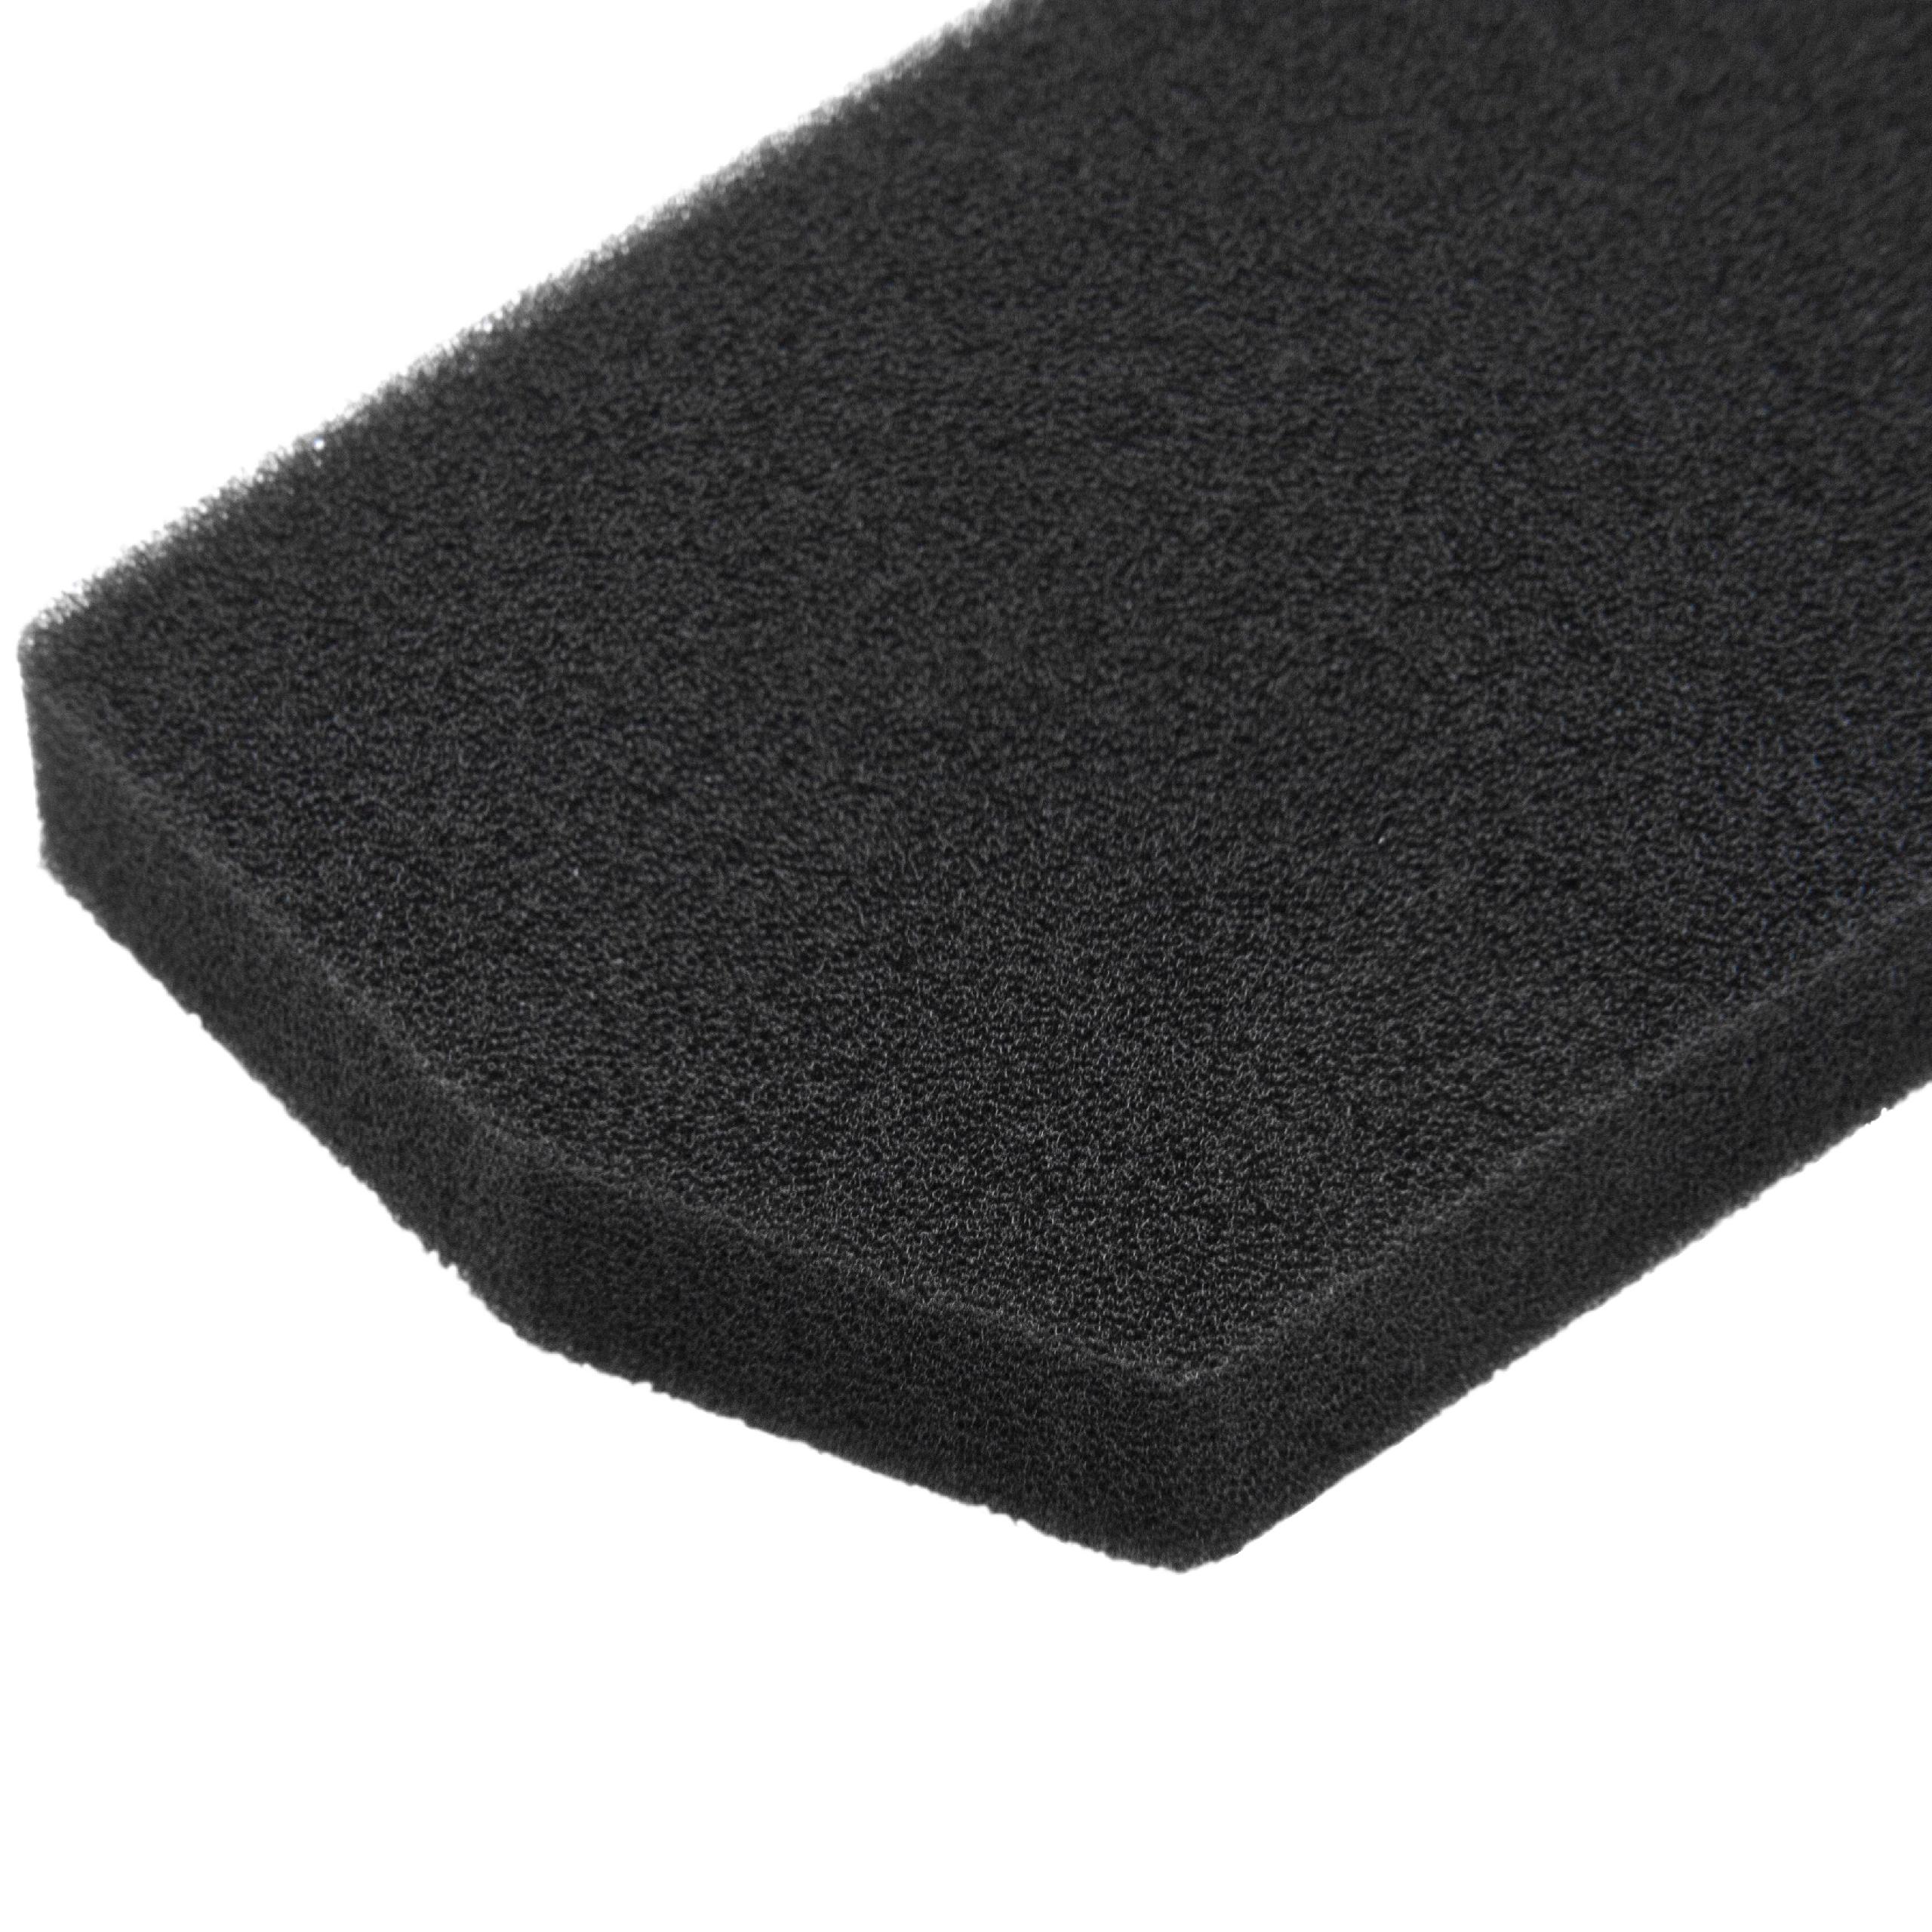 1x foam filter replaces Rowenta RS-RT4042 for Rowenta Vacuum Cleaner